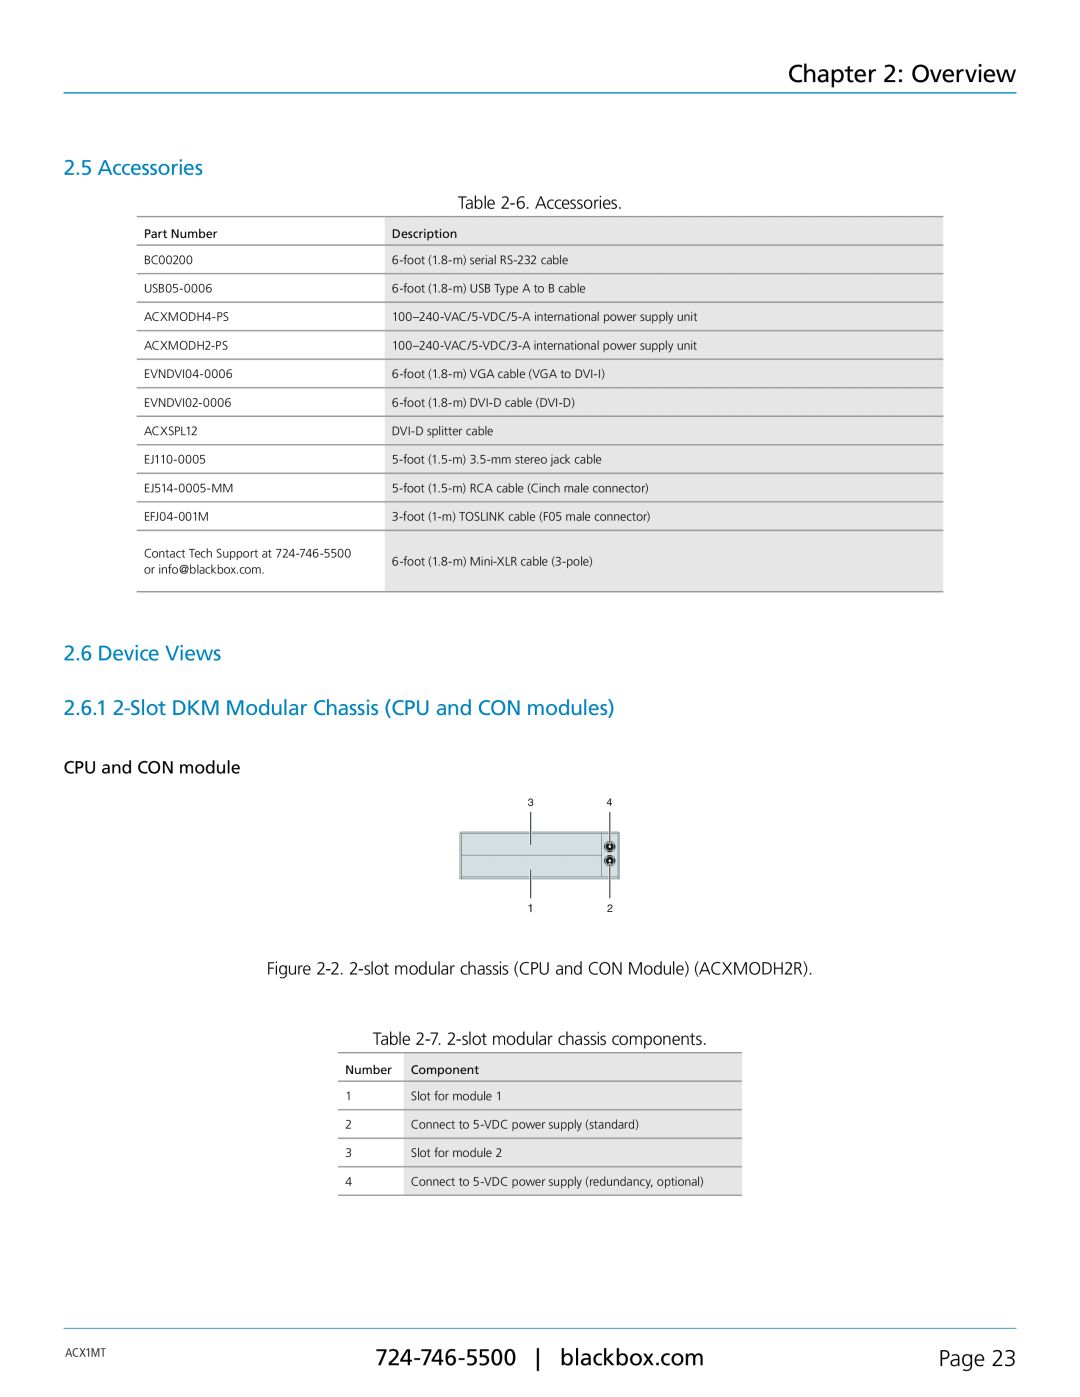 Black Box ACXMODHR Overview, Accessories, Device Views 2.6.1 2-Slot DKM Modular Chassis CPU and CON modules, Page, ACX1MT 